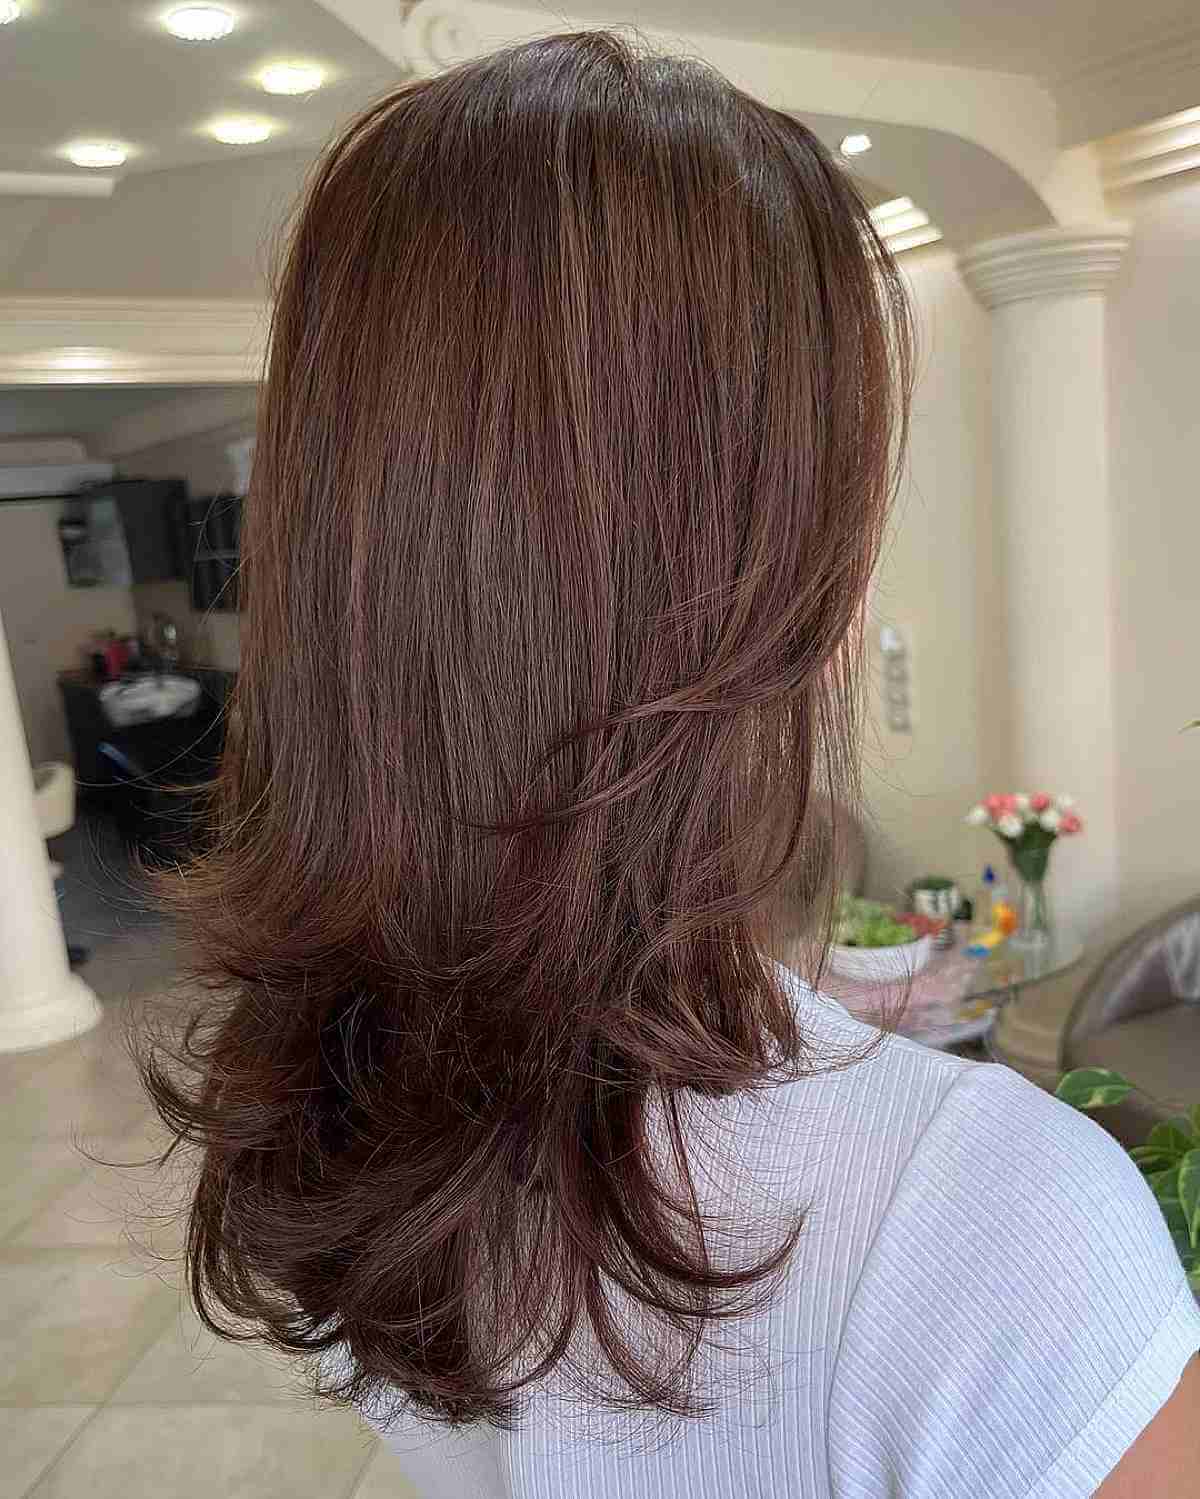 Medium to Long Haircut with Disconnected Layers